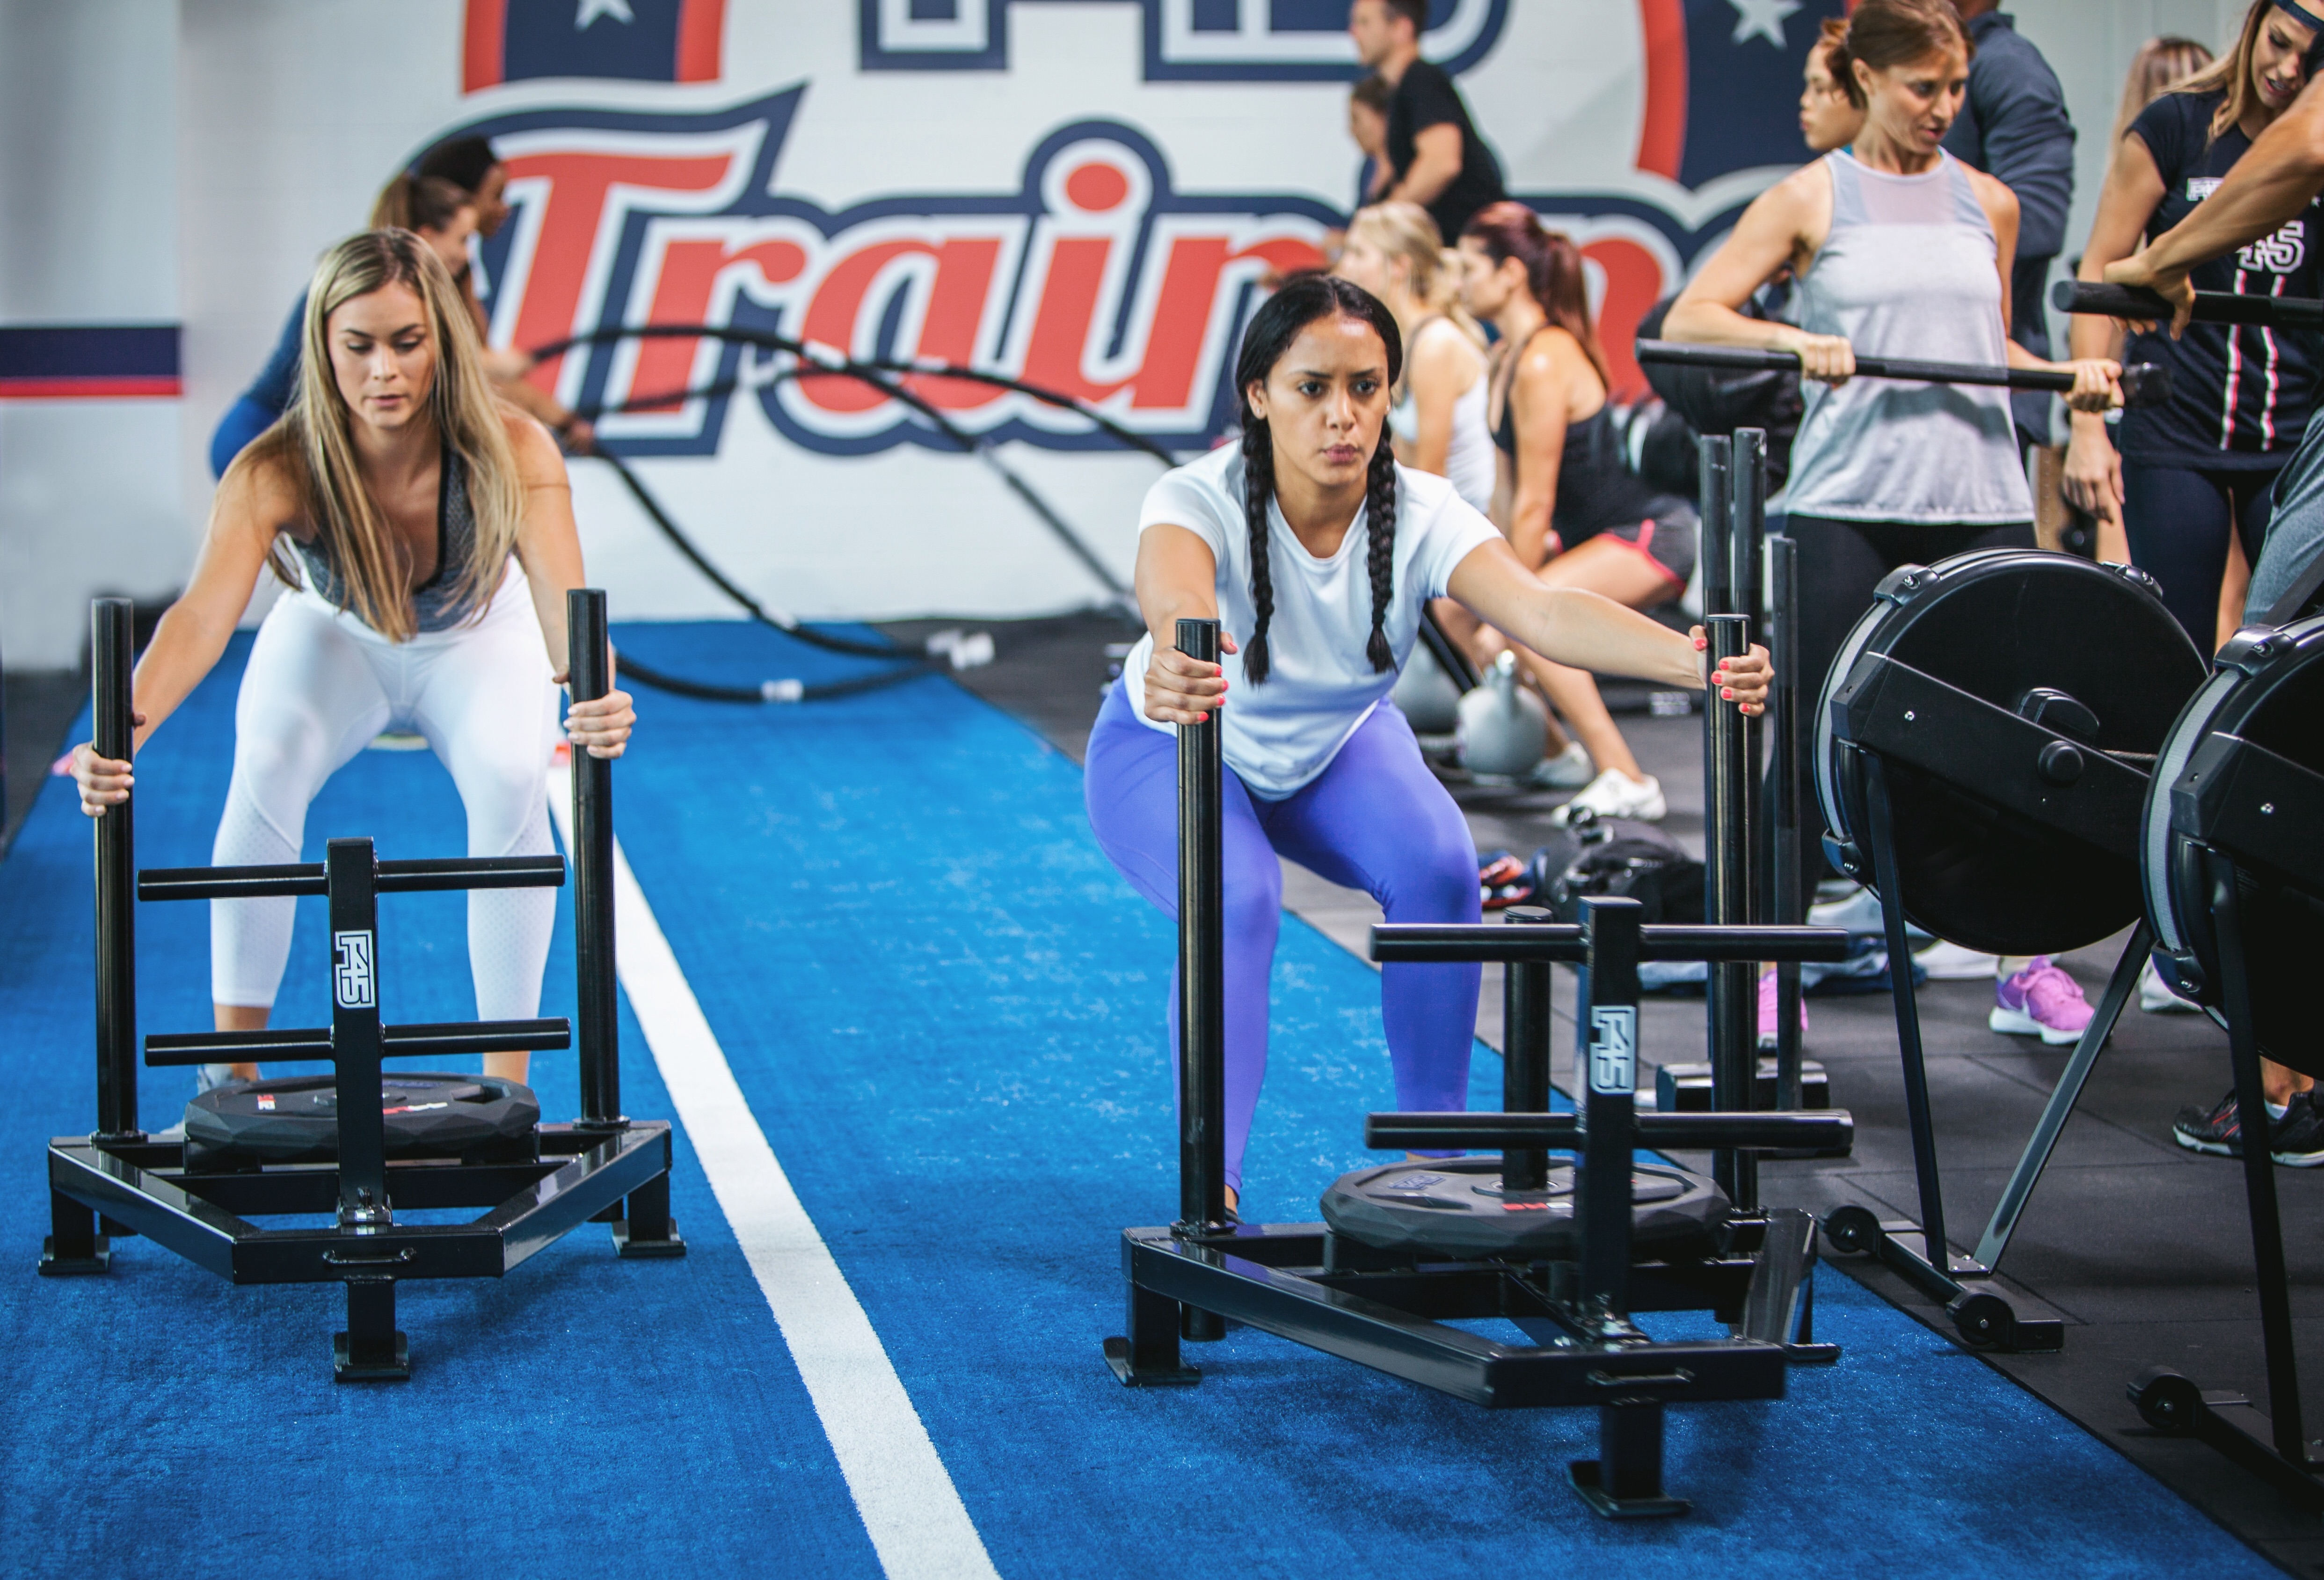 Group of people participating in an F45 workout